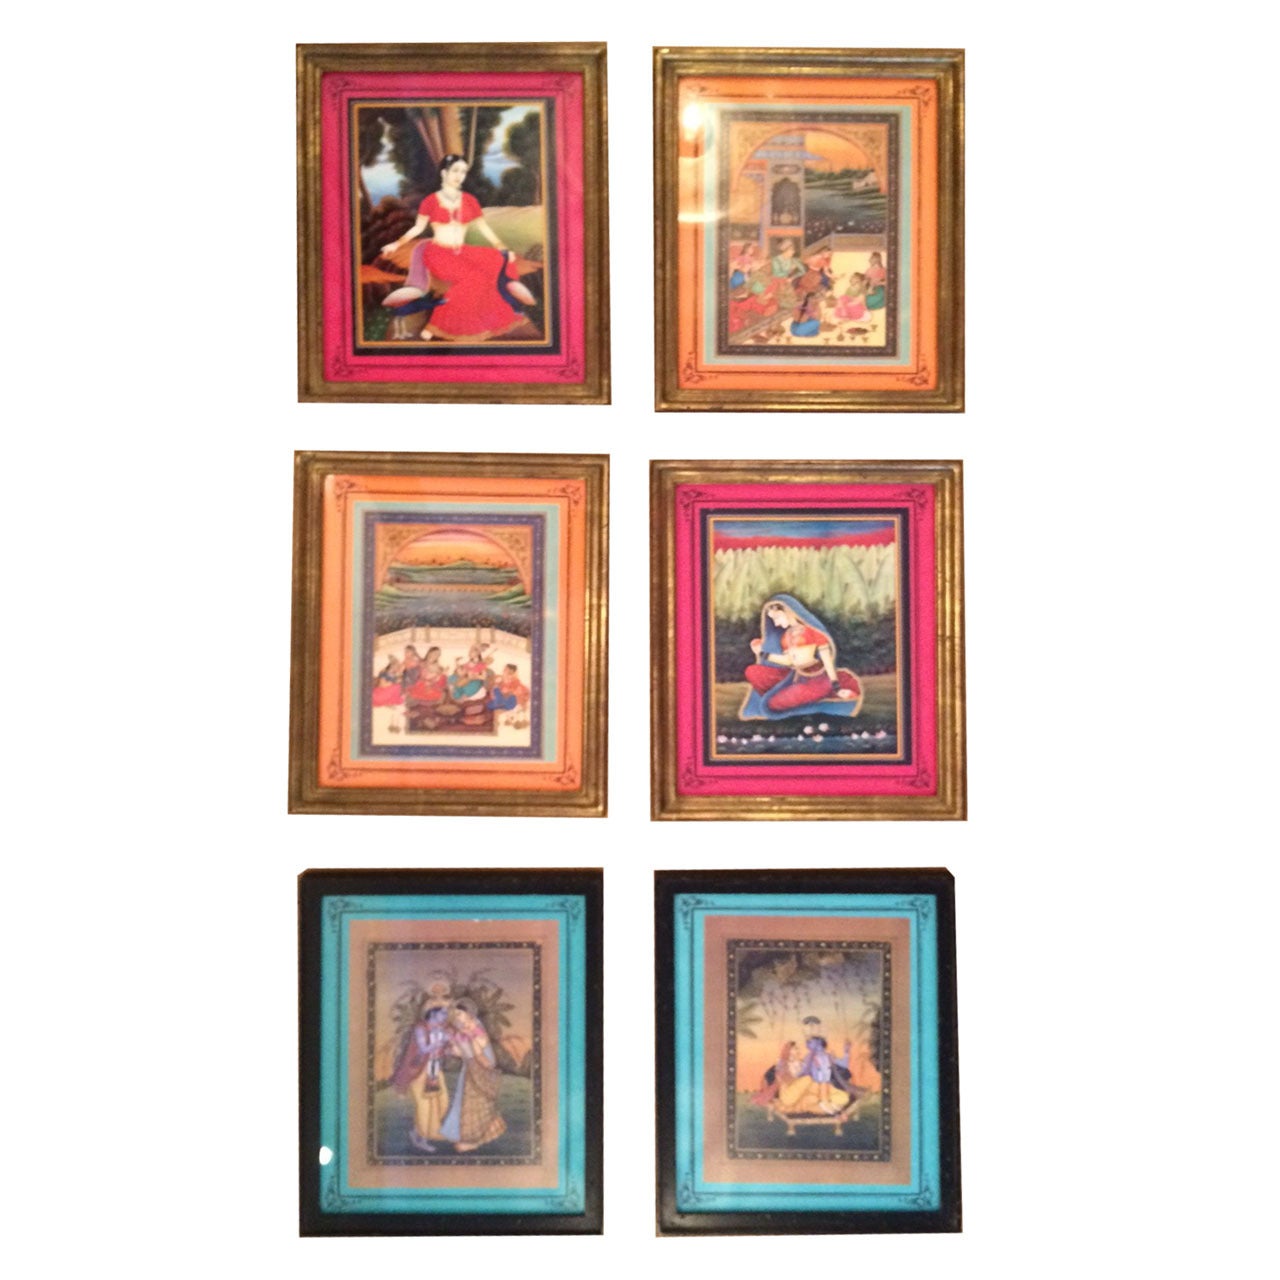 Colorful Indian Prints For Sale